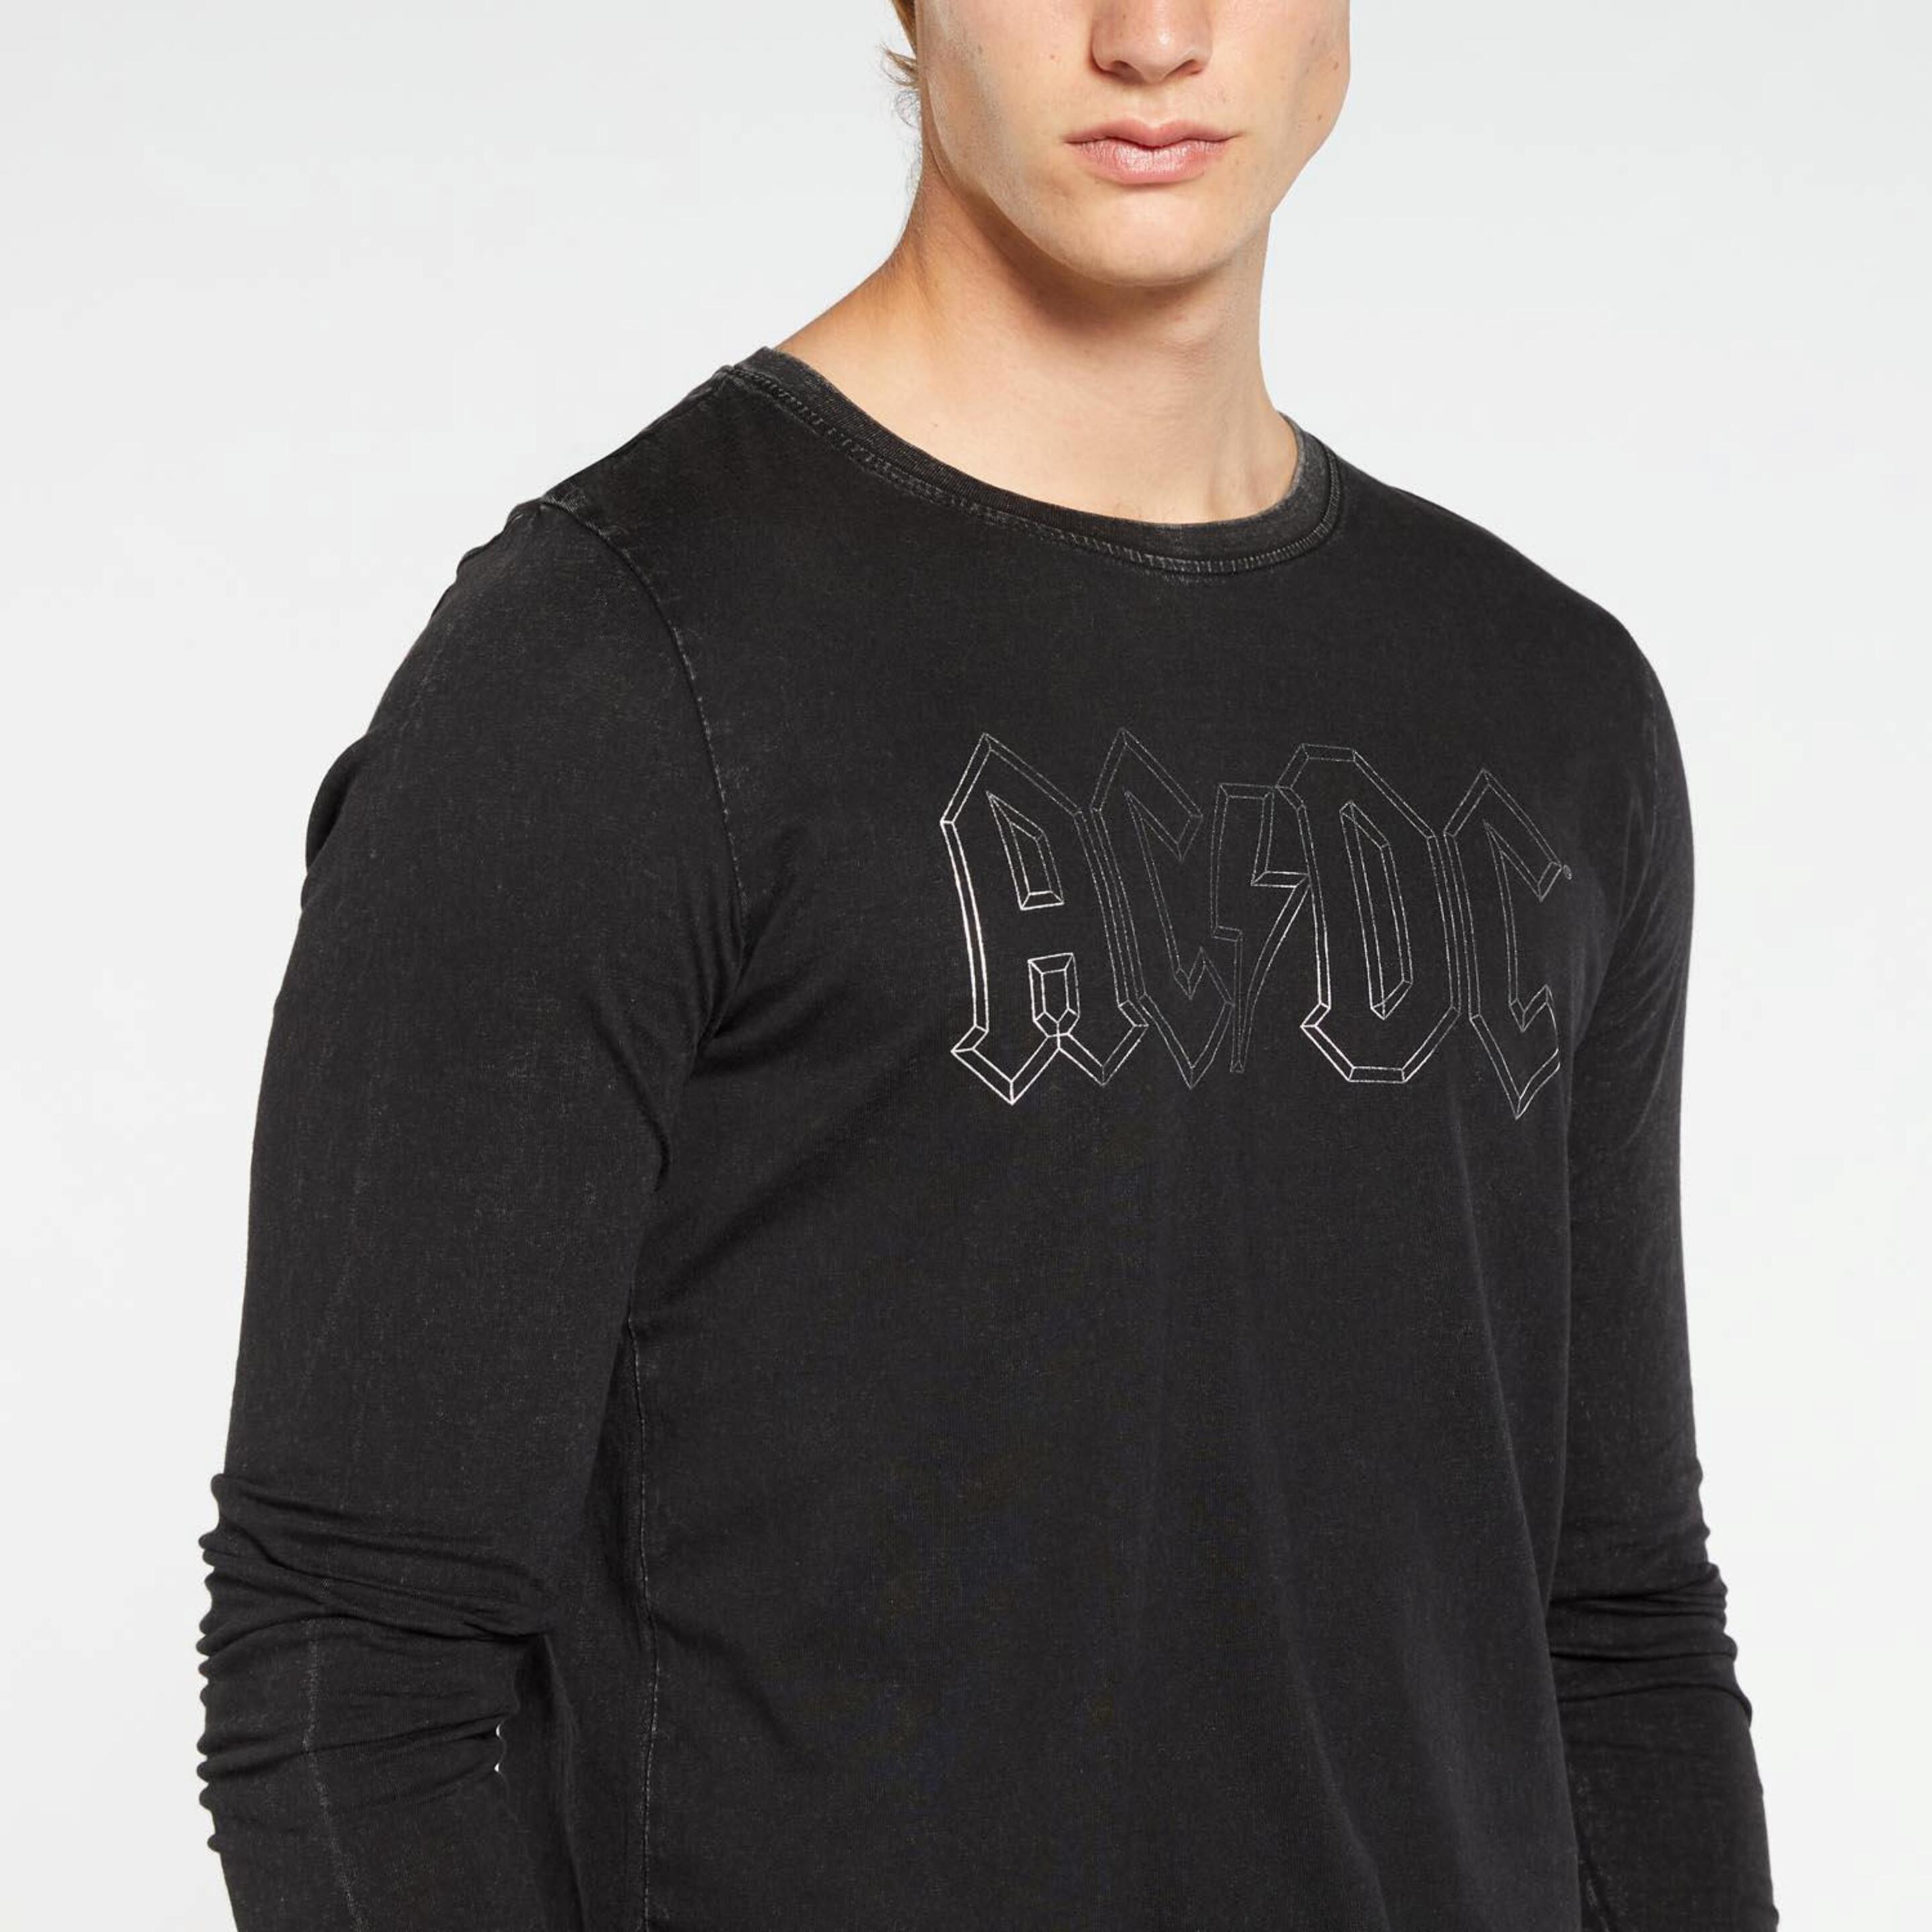 T-shirt Acdc